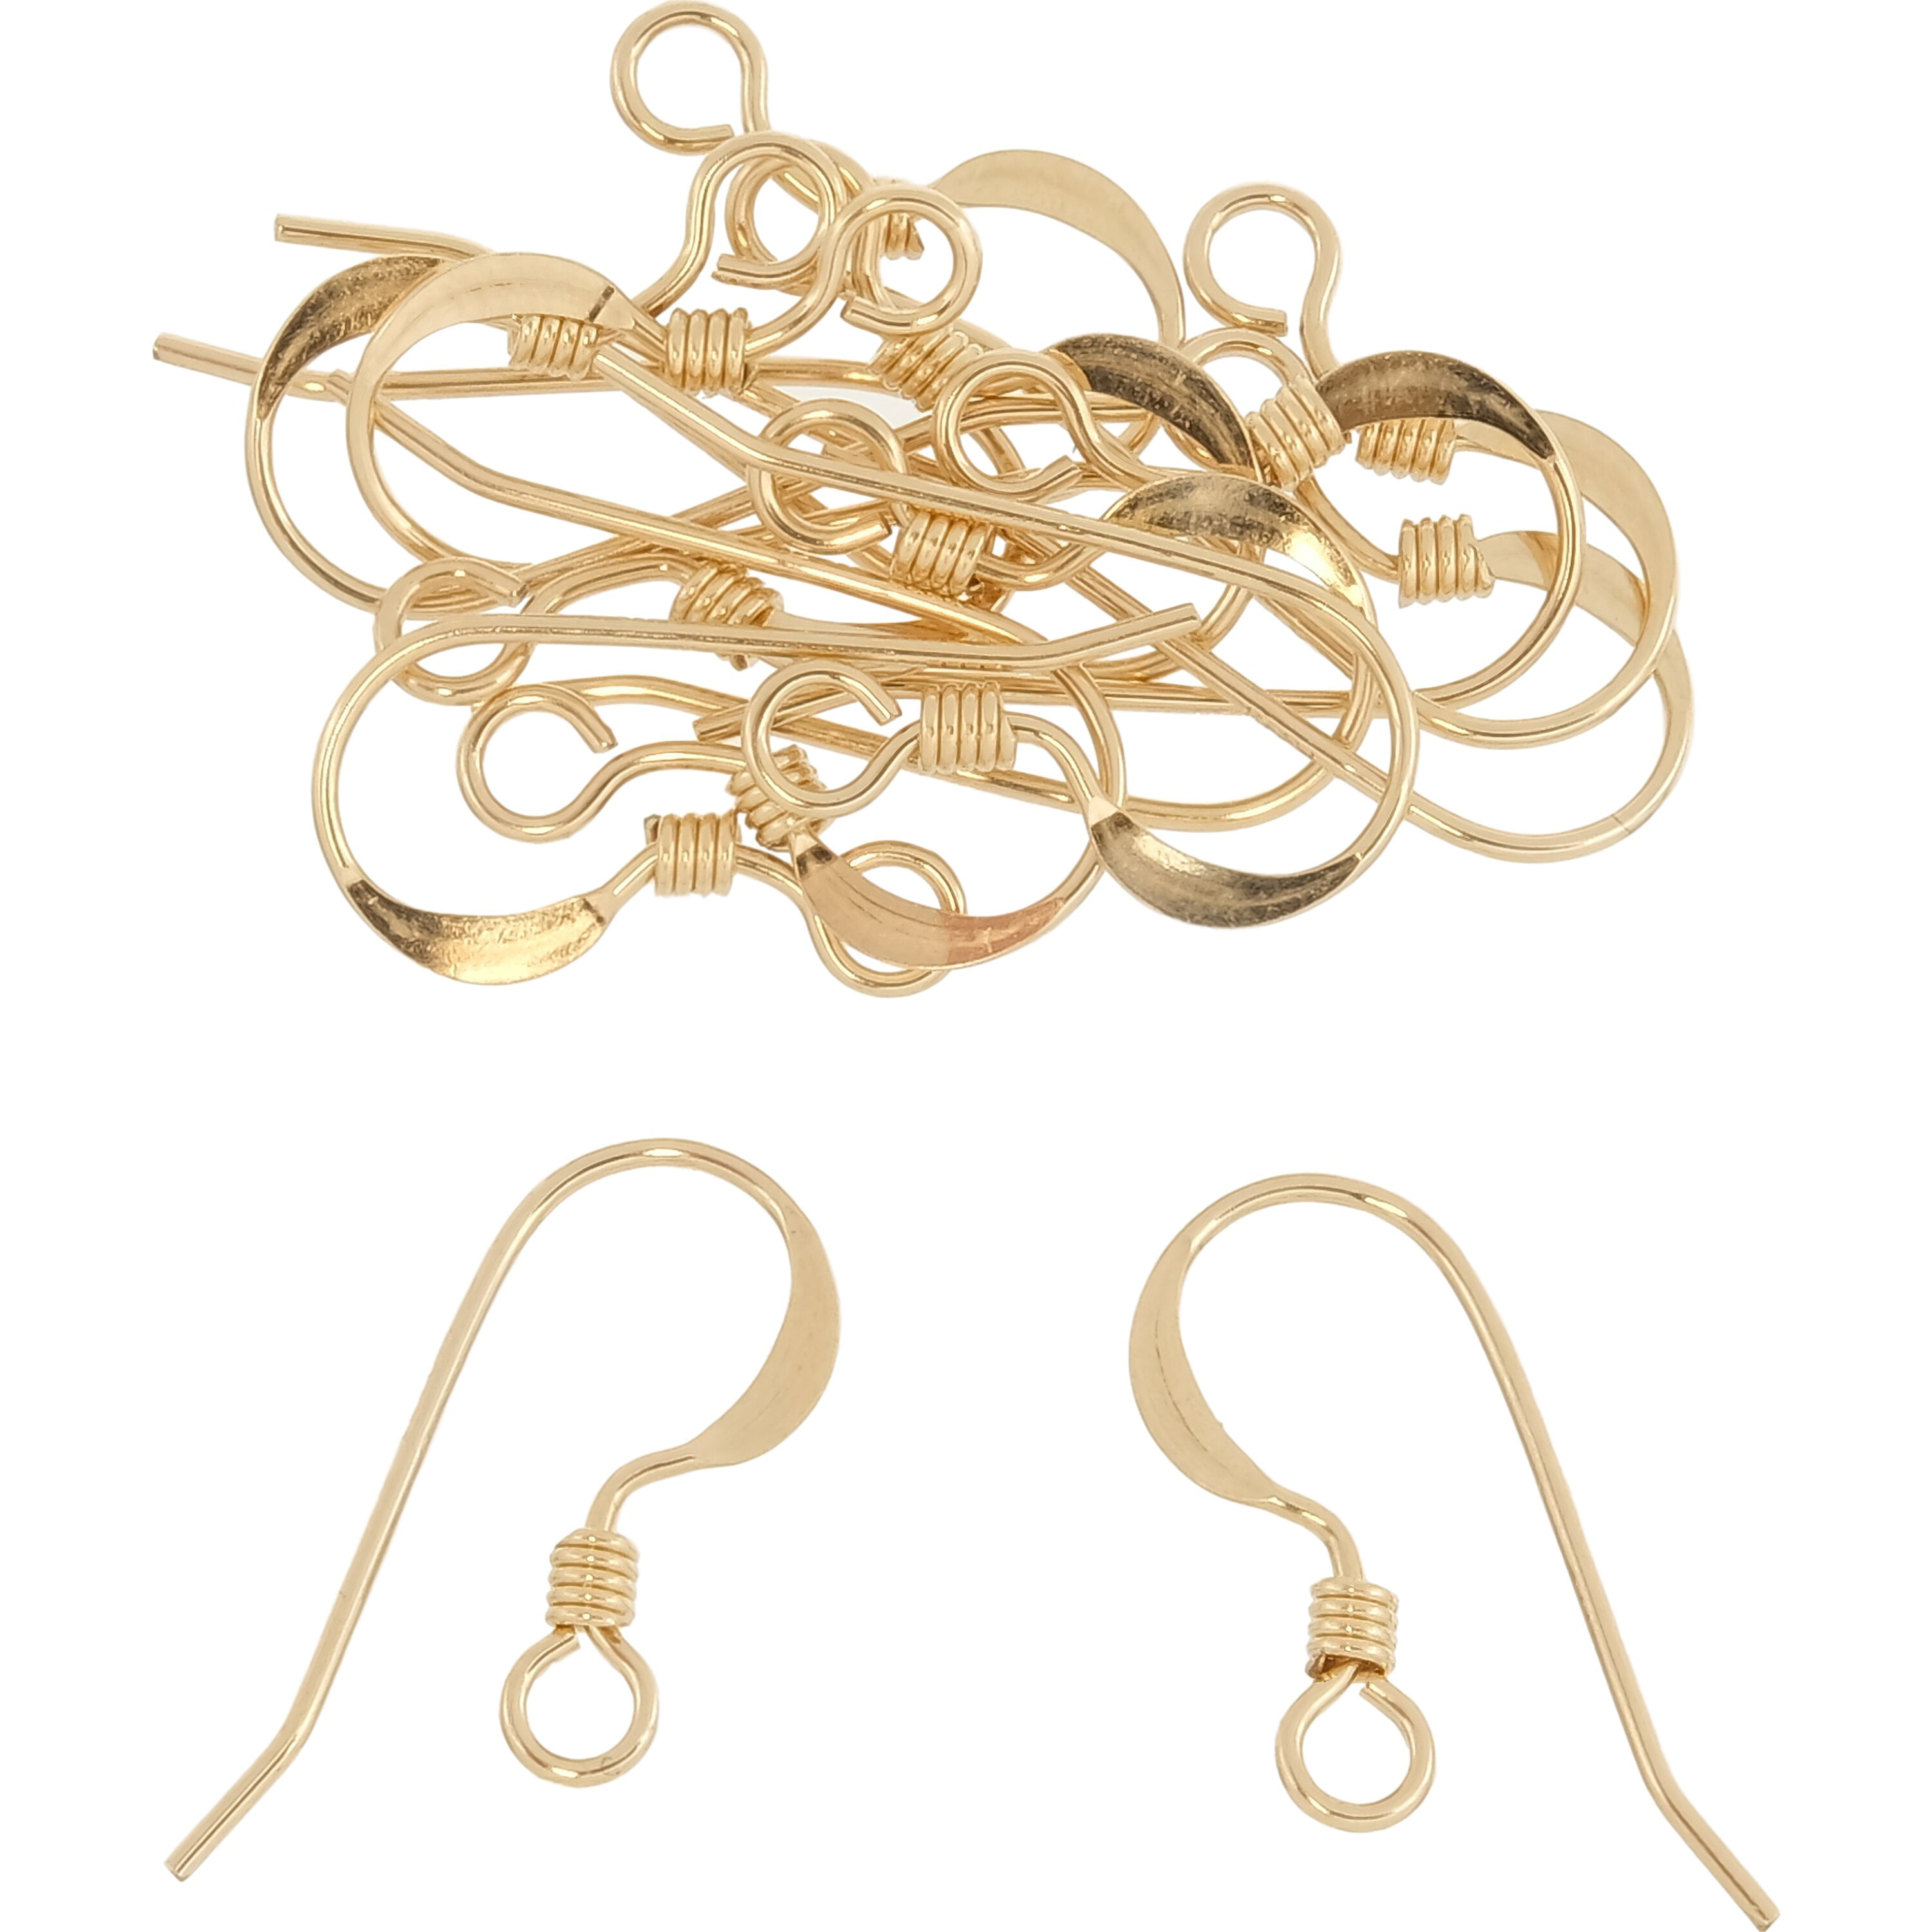 400 Pcs/200 Pairs Silver And Gold Earring Hooks, Fish Earring Hooks Ear  Wires For Jewelry Making Di - Jnnjv